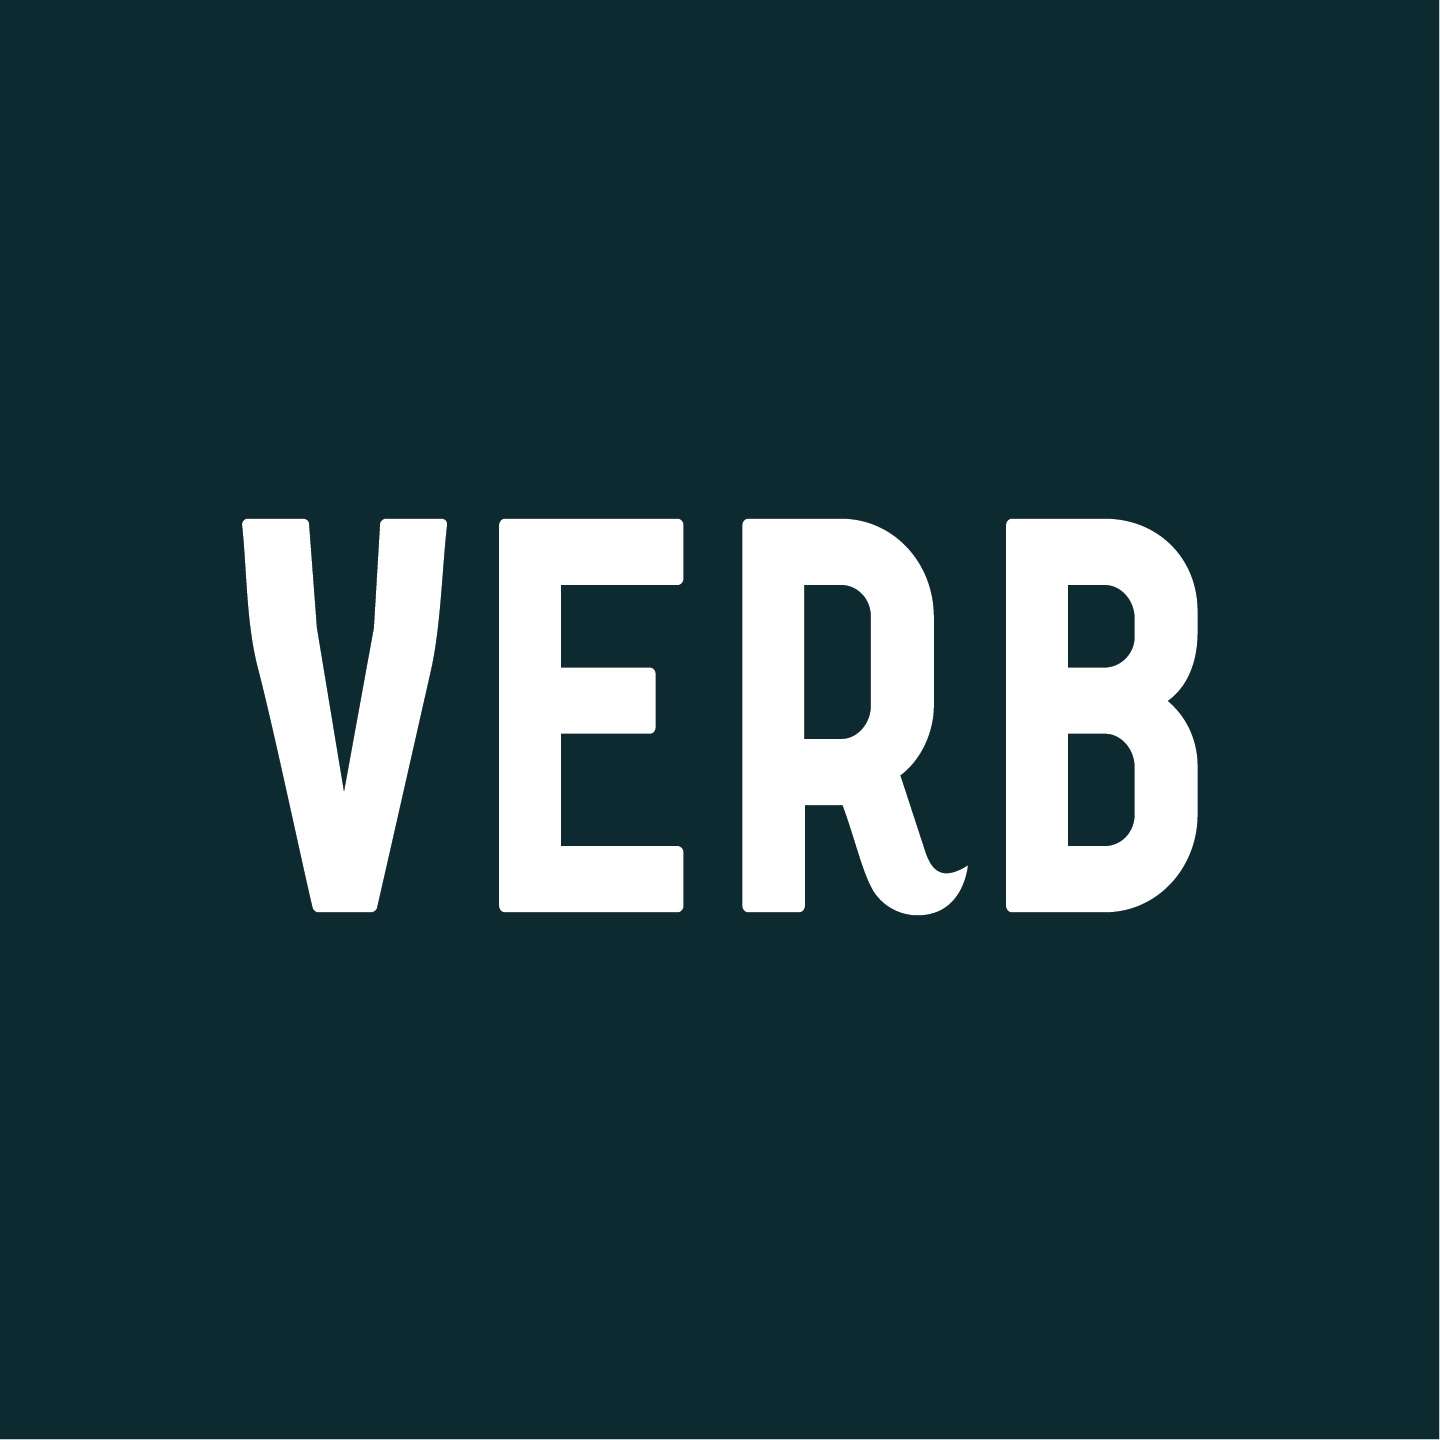 Verb Products - Crunchbase Company Profile & Funding